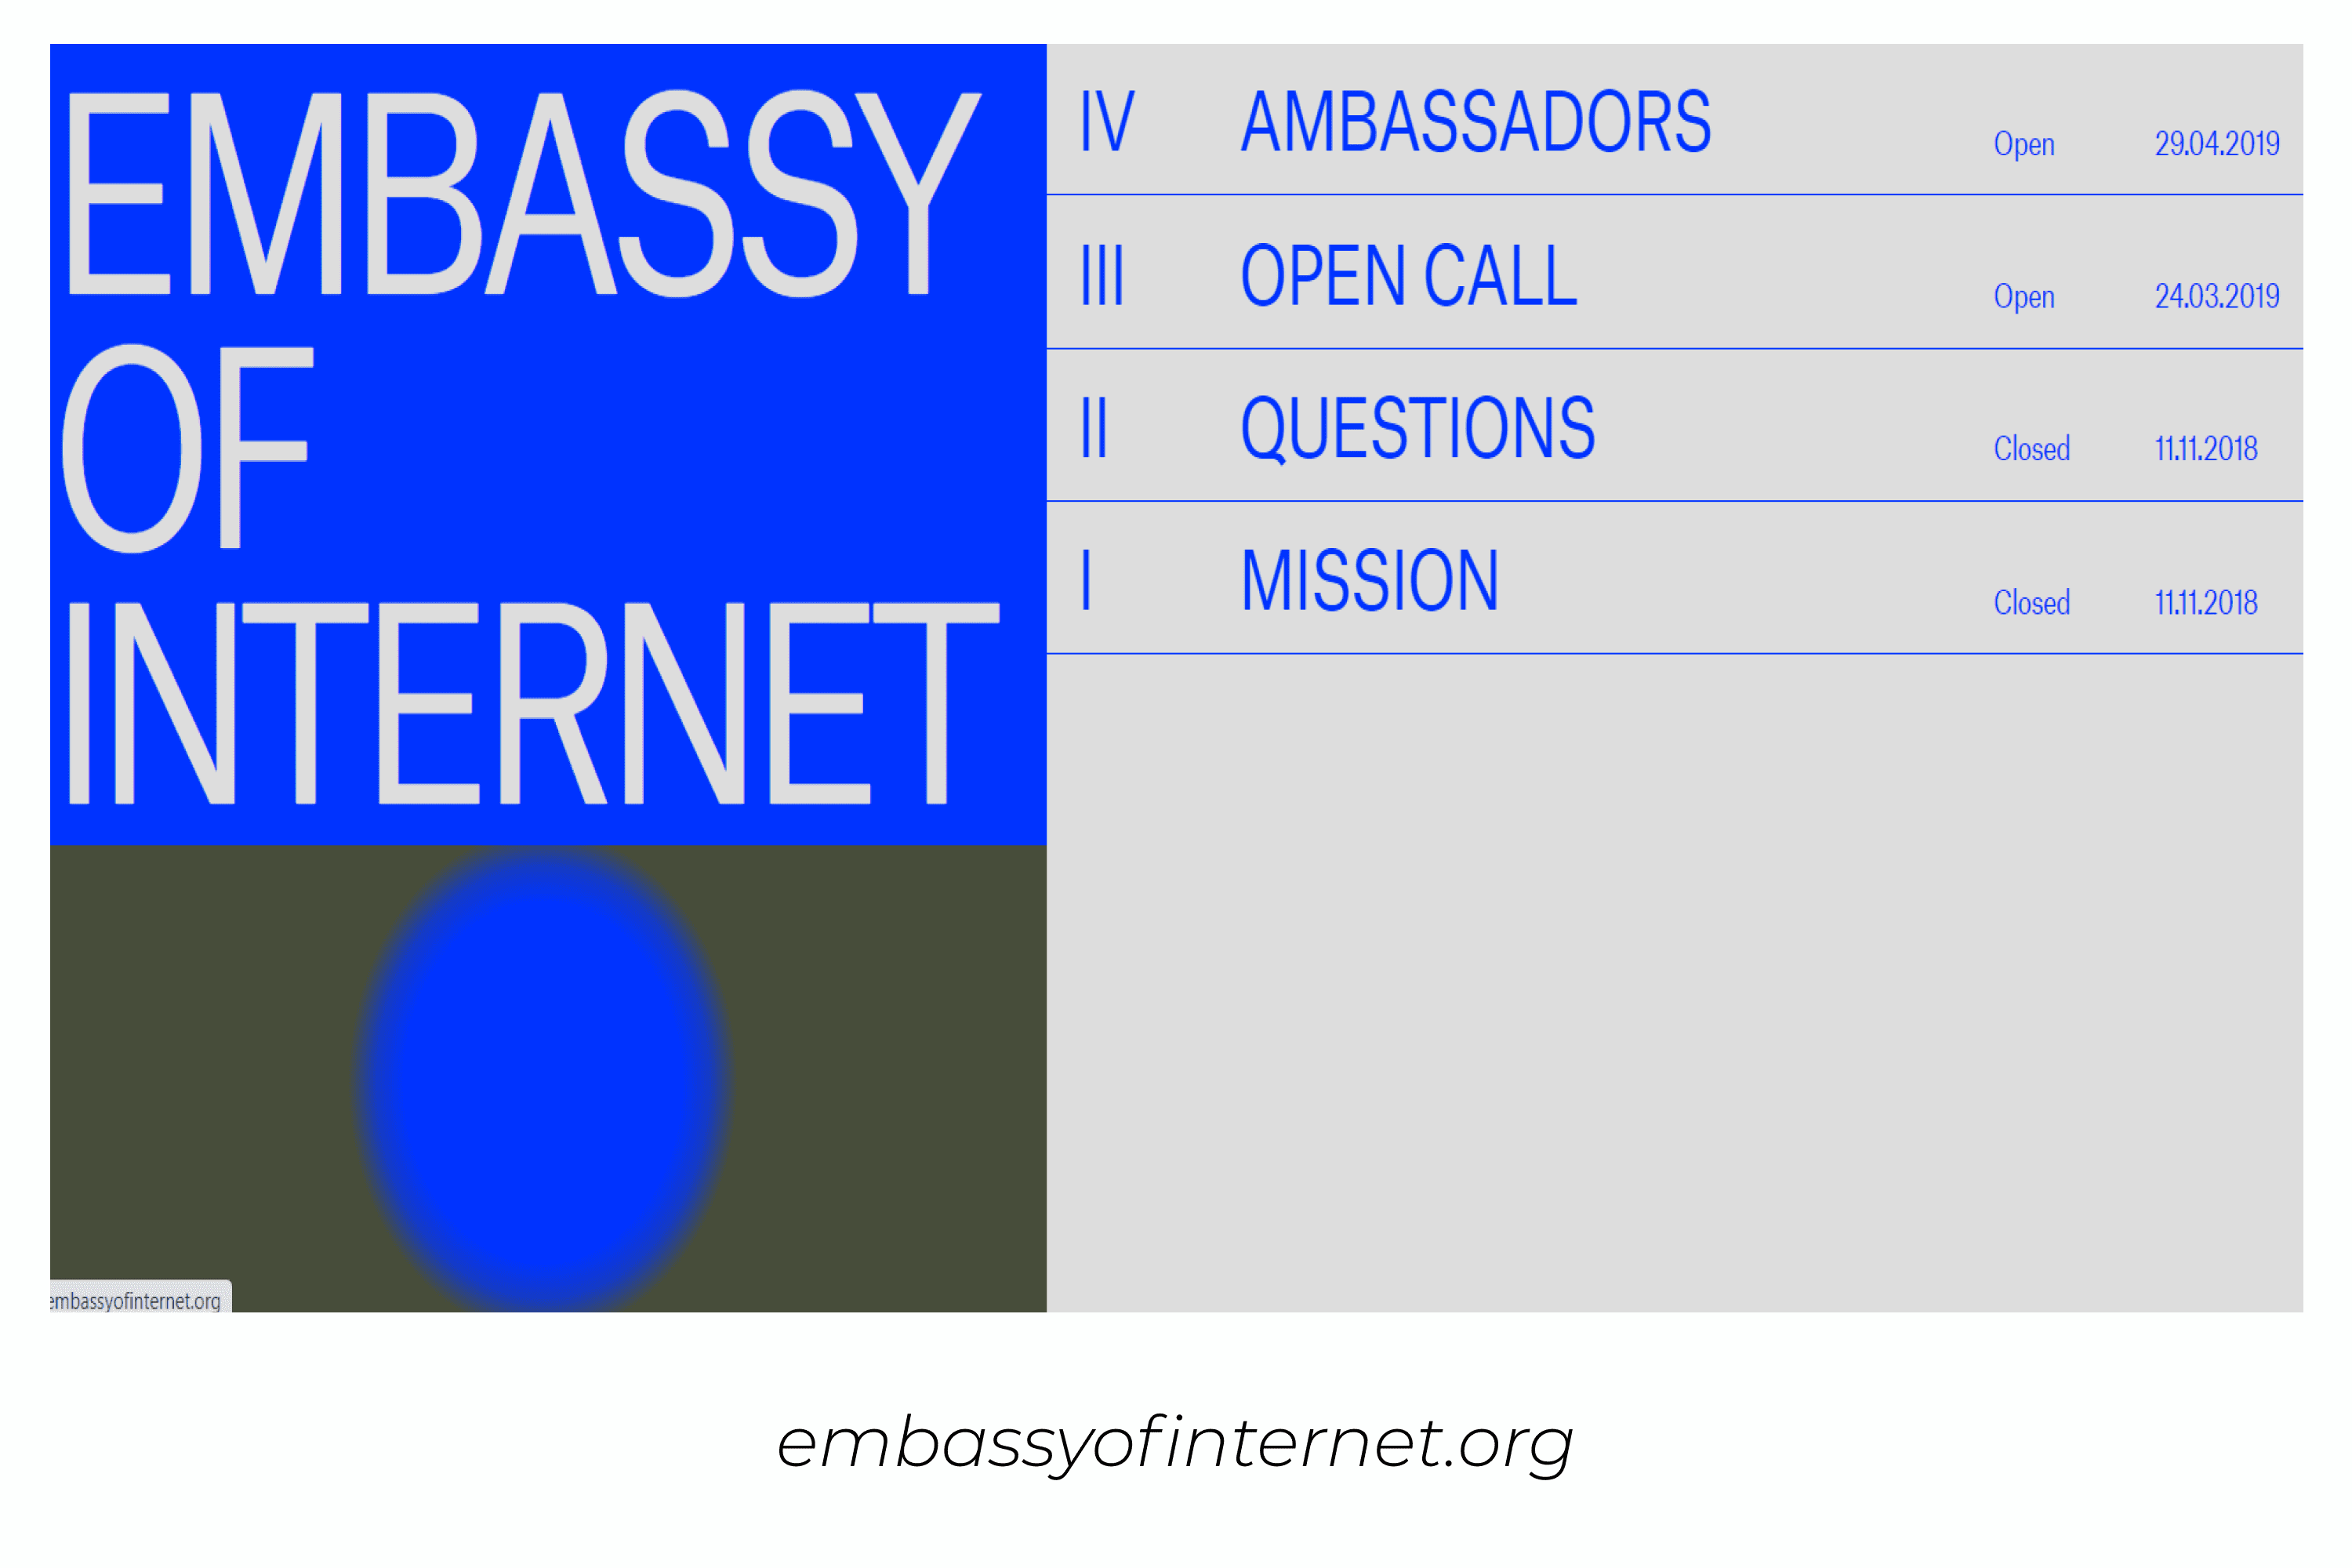 Main page of Embassy of Internet.